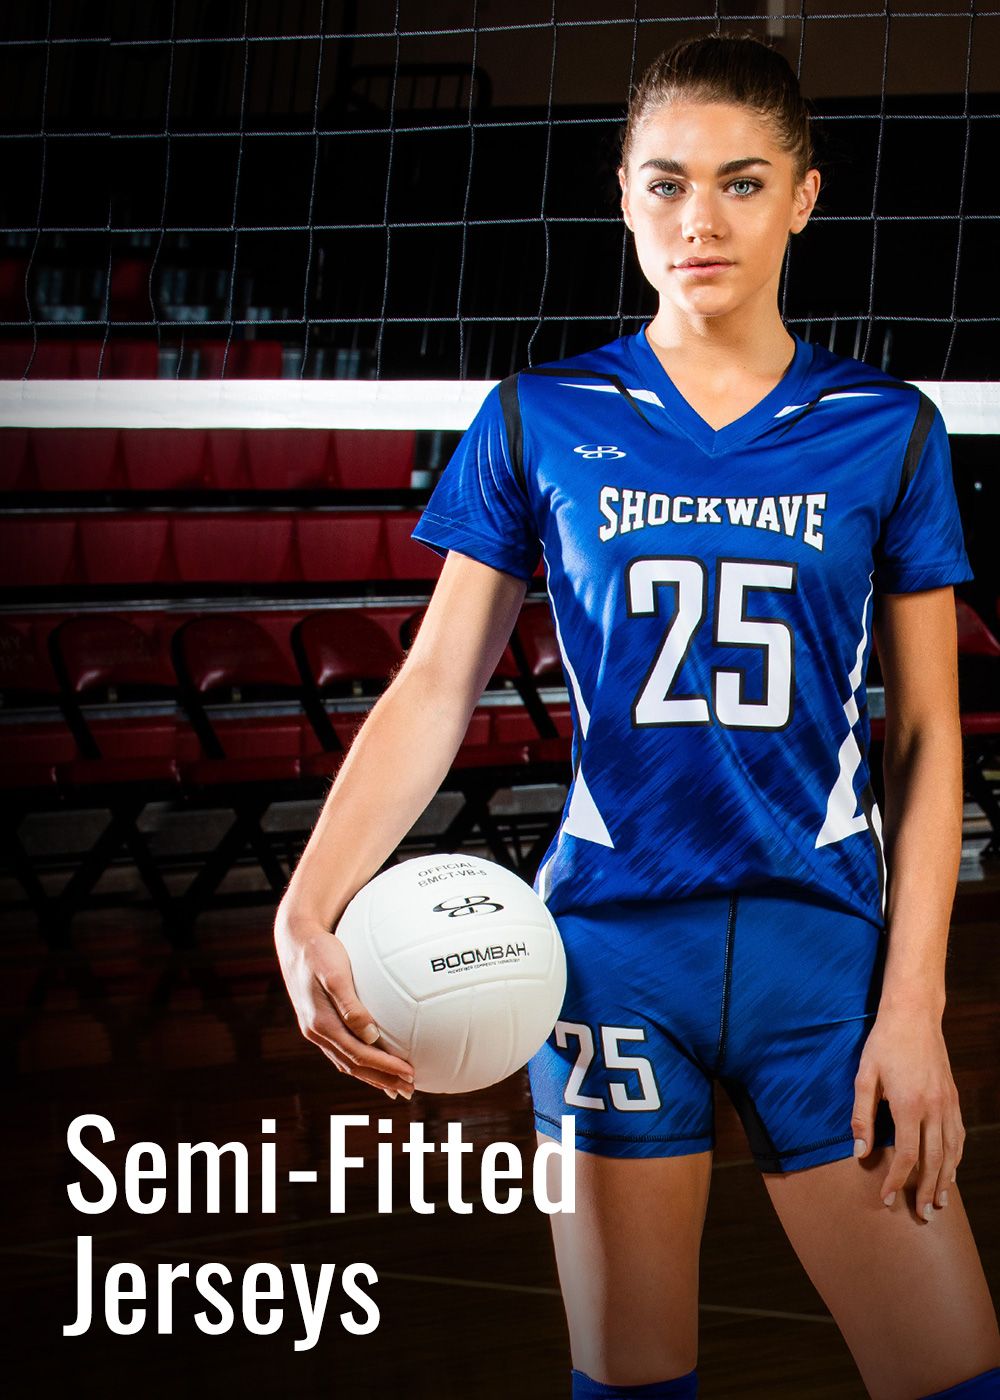 Custom Women's and Girls' Semi-Fitted Volleyball Jerseys